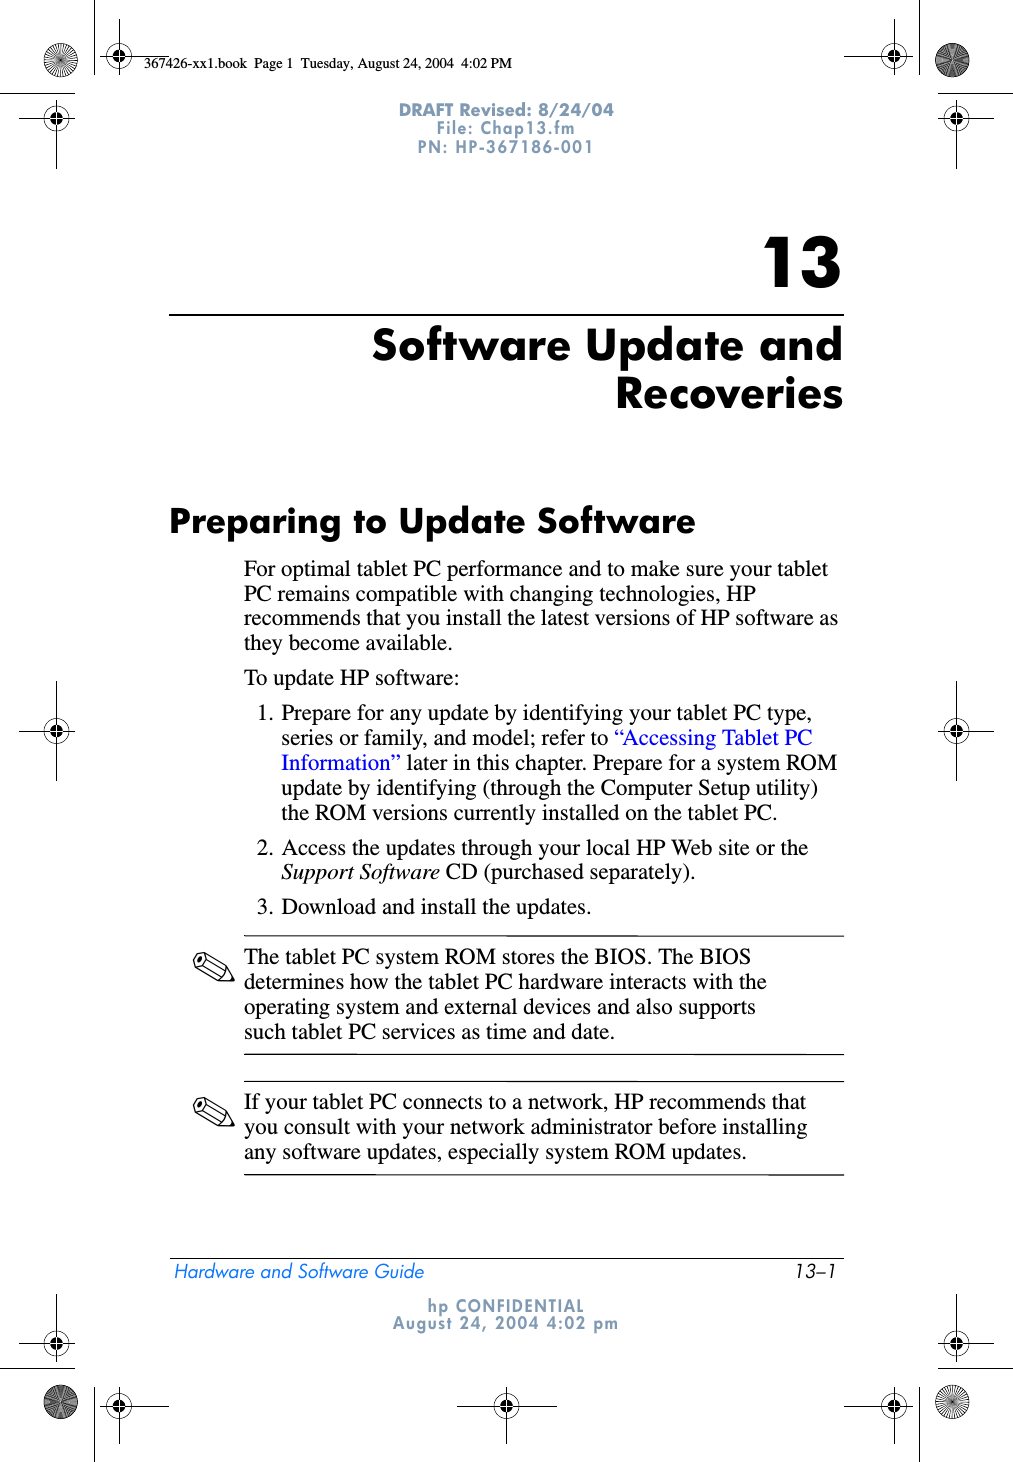 Hardware and Software Guide 13–1DRAFT Revised: 8/24/04File: Chap13.fm PN: HP-367186-001 hp CONFIDENTIALAugust 24, 2004 4:02 pm13Software Update andRecoveriesPreparing to Update SoftwareFor optimal tablet PC performance and to make sure your tablet PC remains compatible with changing technologies, HP recommends that you install the latest versions of HP software as they become available.To update HP software:1. Prepare for any update by identifying your tablet PC type, series or family, and model; refer to “Accessing Tablet PC Information” later in this chapter. Prepare for a system ROM update by identifying (through the Computer Setup utility) the ROM versions currently installed on the tablet PC.2. Access the updates through your local HP Web site or the Support Software CD (purchased separately).3. Download and install the updates.✎The tablet PC system ROM stores the BIOS. The BIOS determines how the tablet PC hardware interacts with the operating system and external devices and also supports such tablet PC services as time and date. ✎If your tablet PC connects to a network, HP recommends that you consult with your network administrator before installing any software updates, especially system ROM updates.367426-xx1.book  Page 1  Tuesday, August 24, 2004  4:02 PM